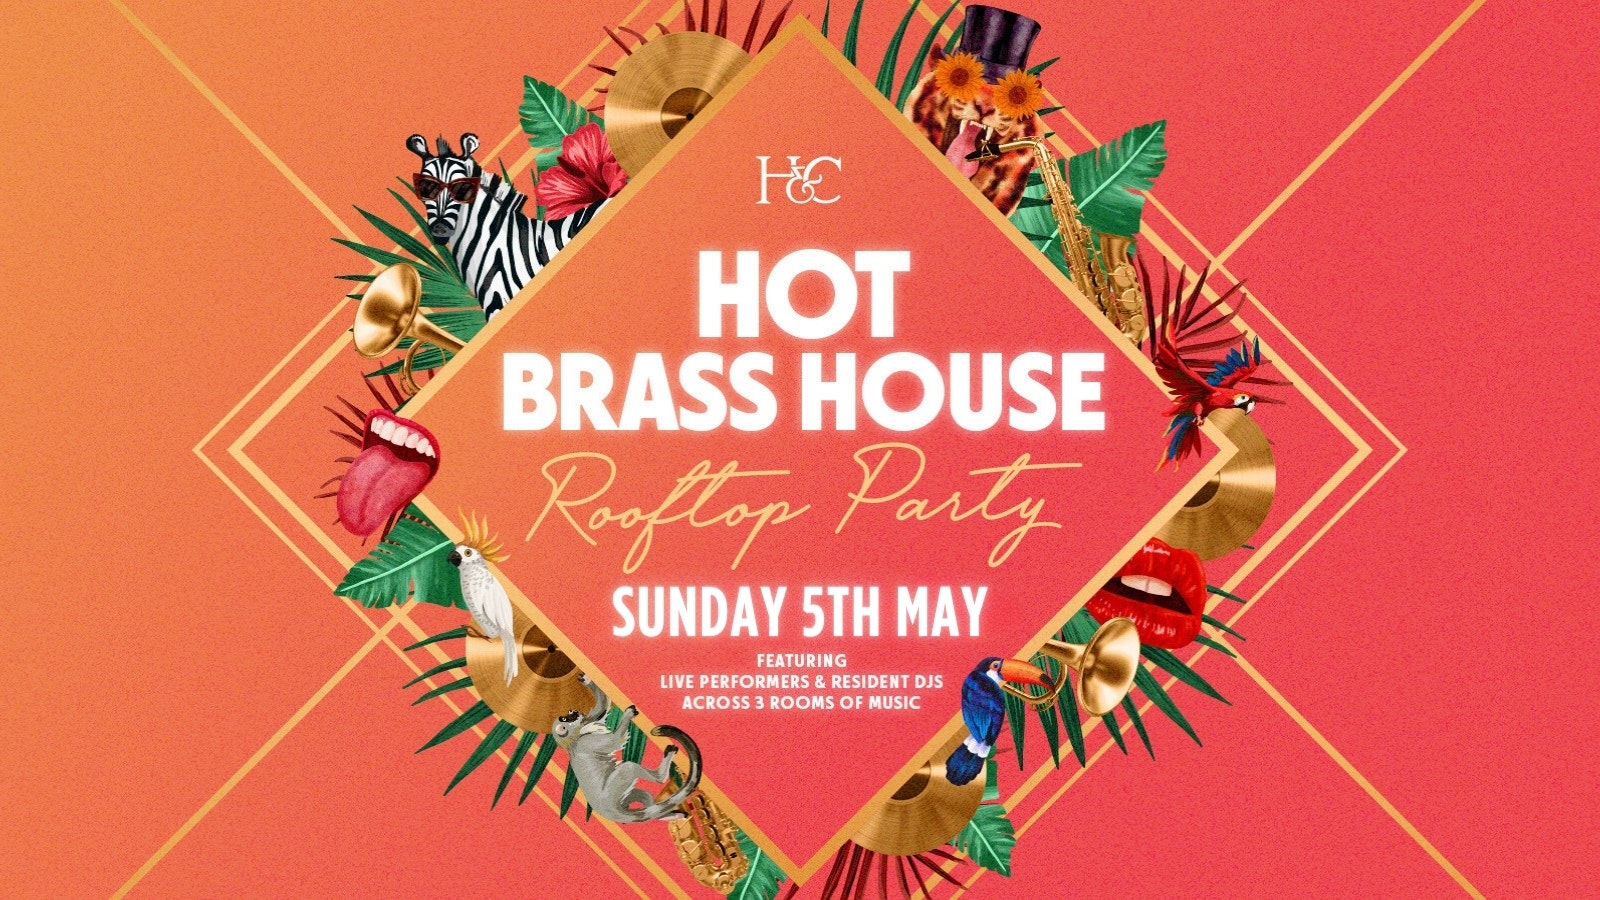 HOT BRASS HOUSE ROOFTOP PARTY – 05/05